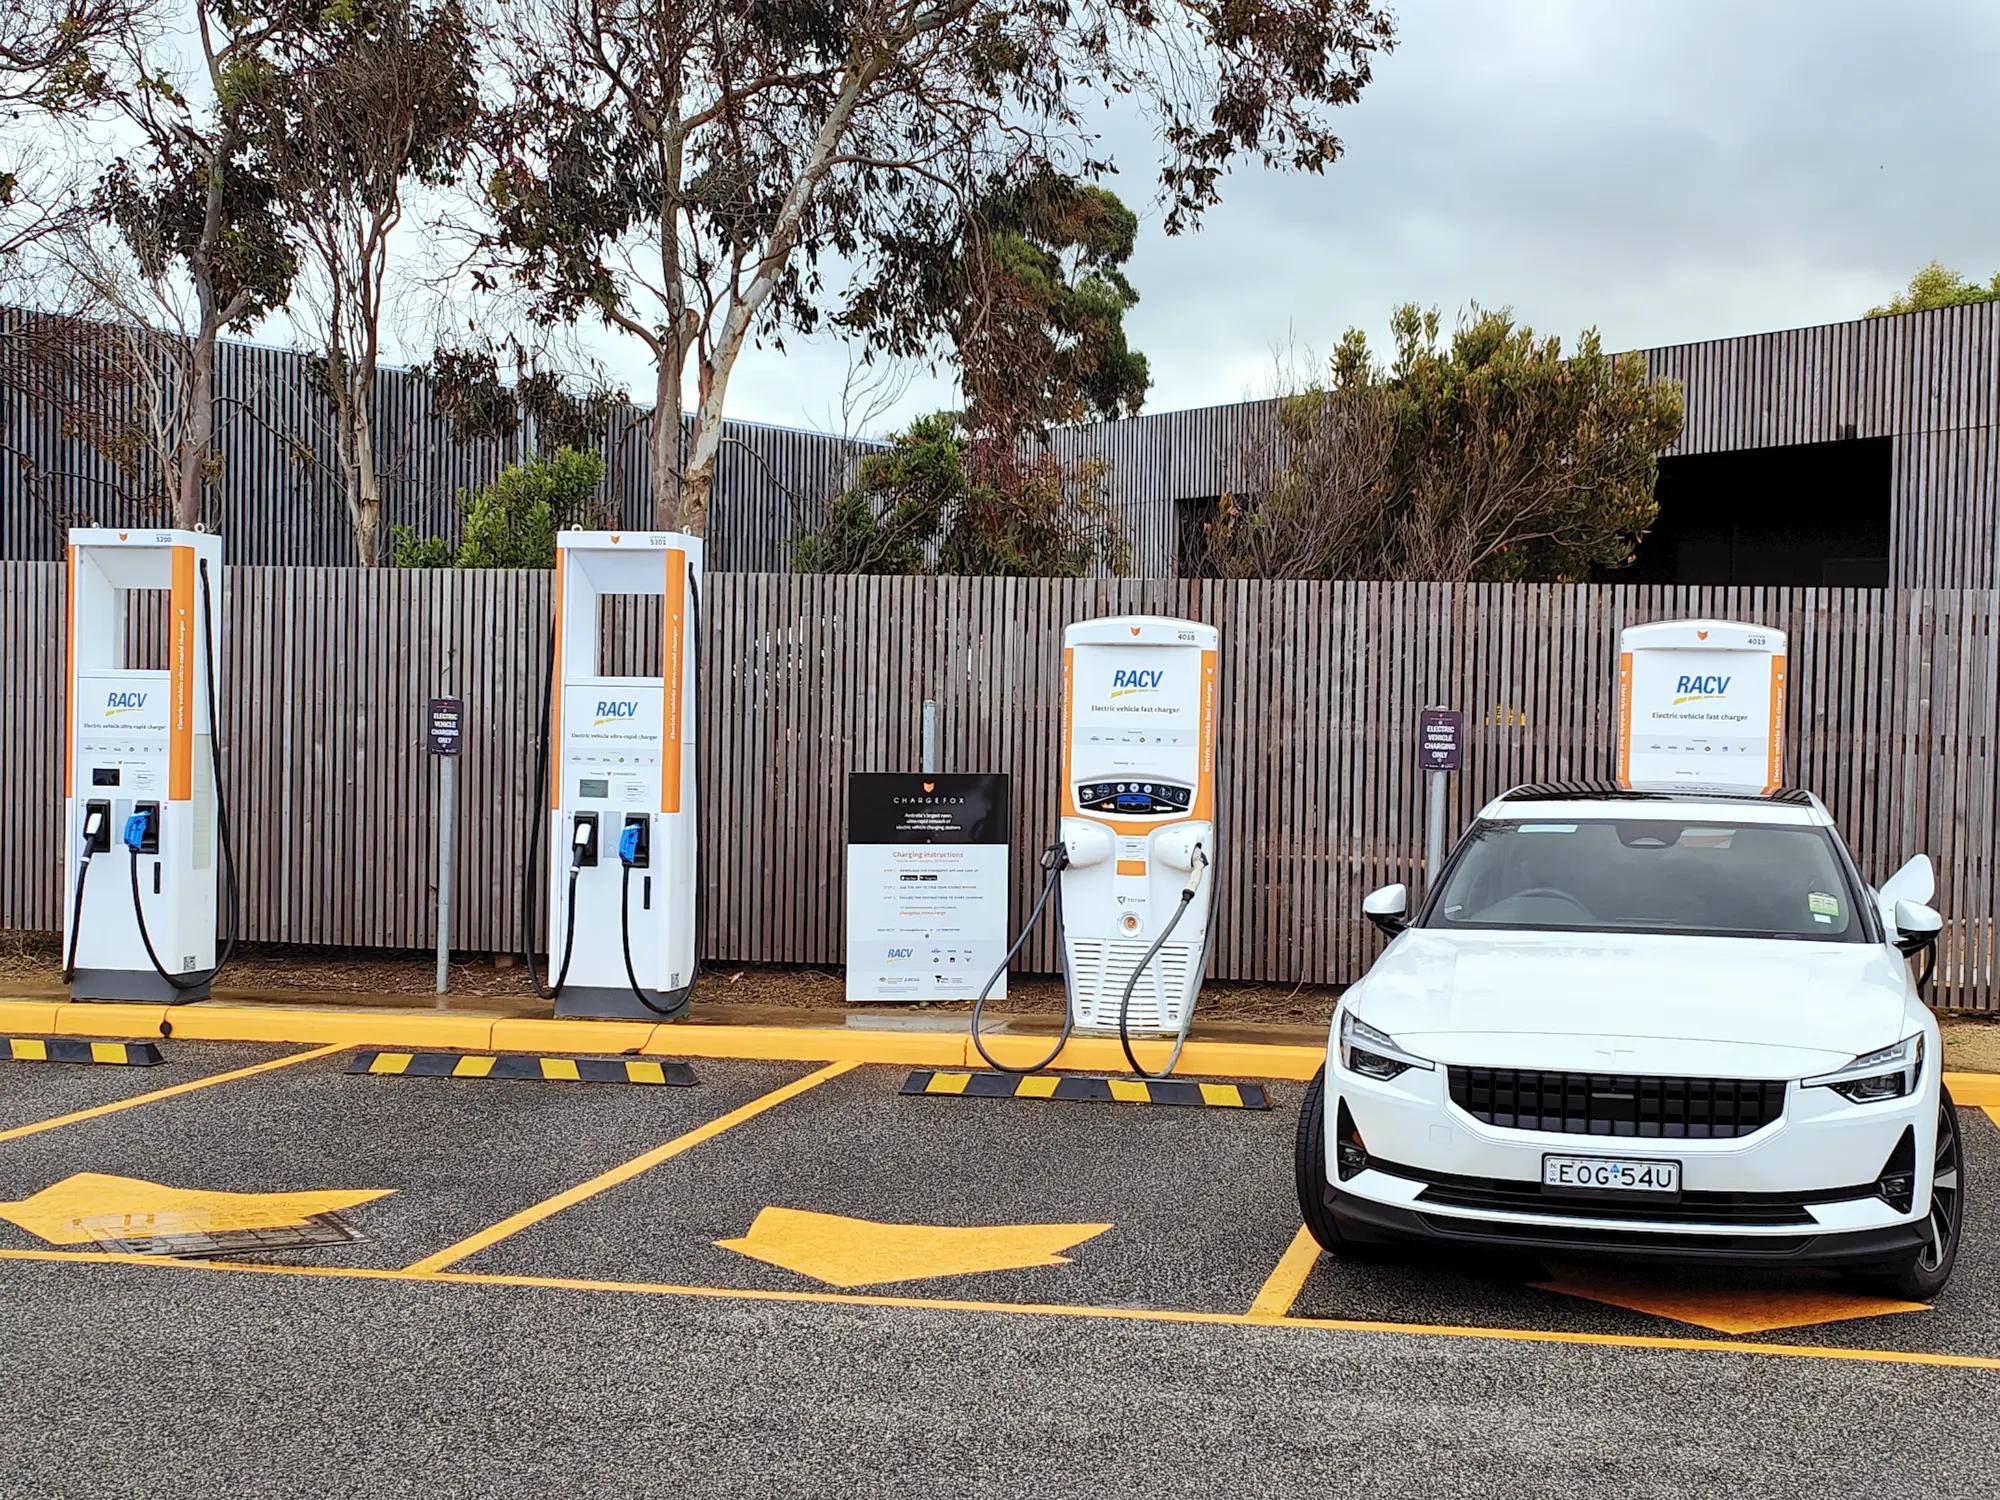 Exclusive details: RACV EV charger upgrades at Barnawartha, Euroa, Airport West, Ballarat, Horsham, Torquay, Moe and 6 new DC charger locations